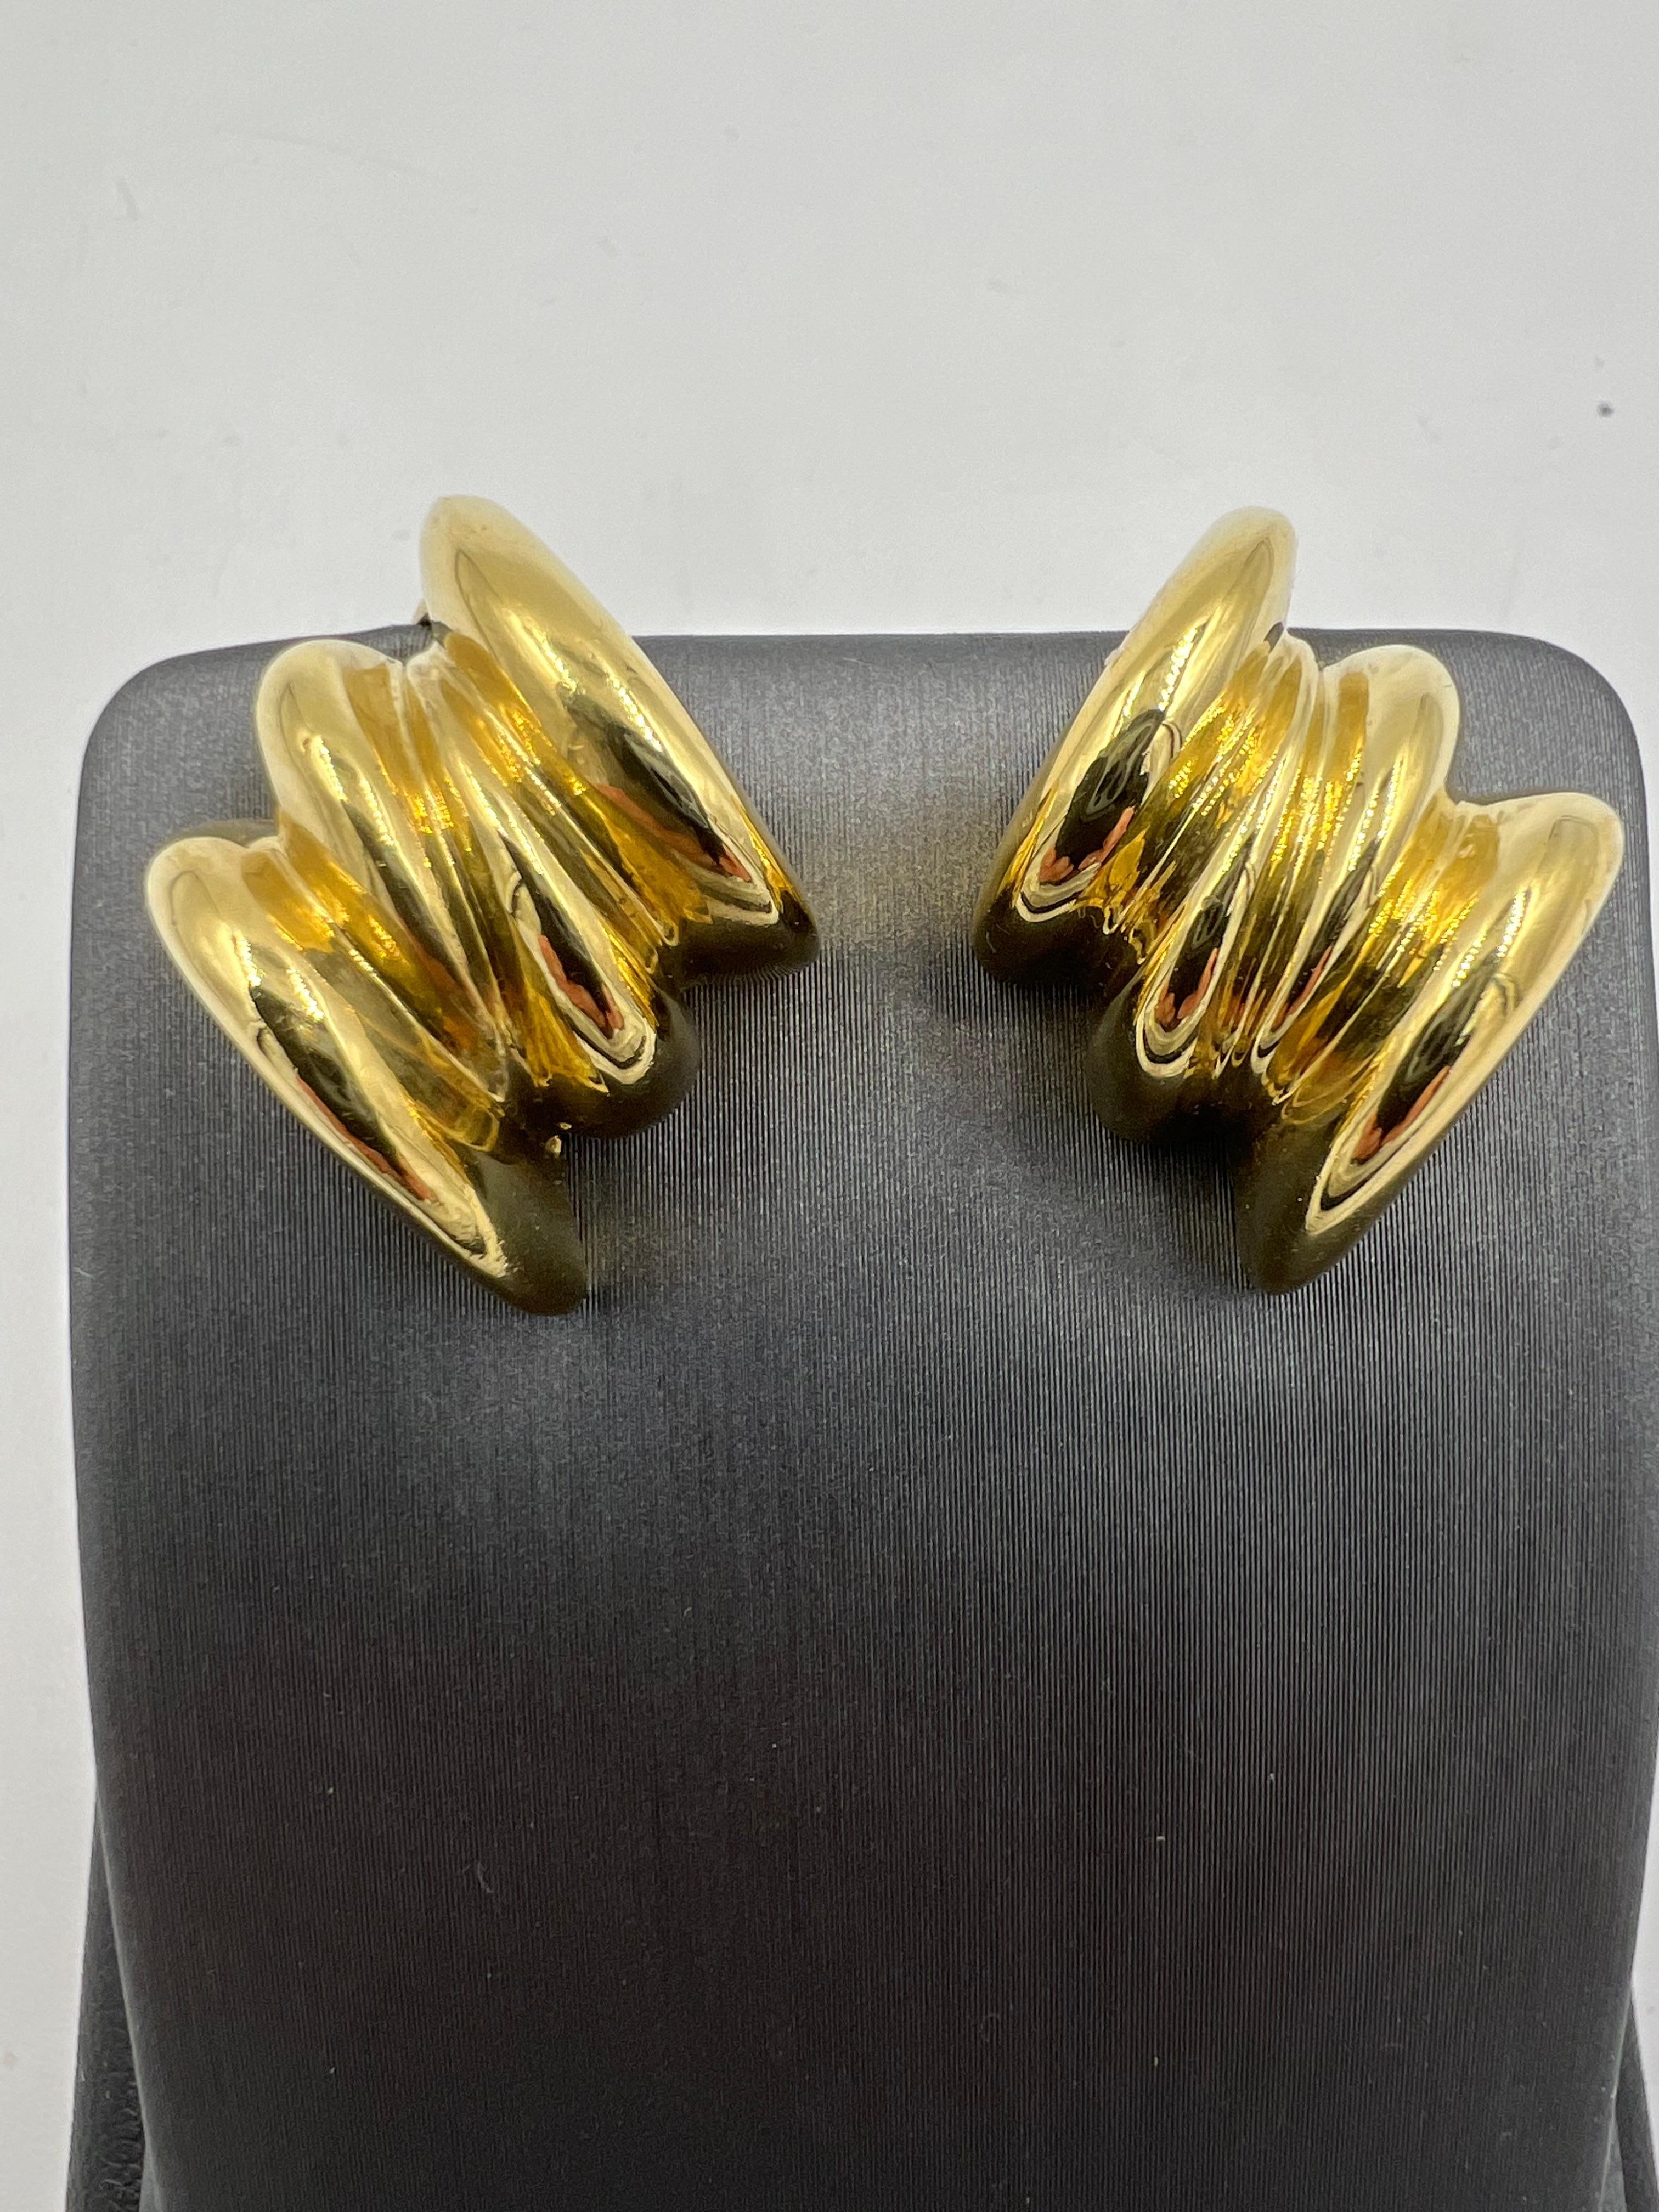 Tiffany ribbed yellow gold clip-on earrings, circa 1970s.

  In the glamorous era of the 1970s, fashion was bold and extravagant. One iconic piece that epitomized the style 
of the time was the Tiffany Ribbed Yellow Gold Clip-on Earrings. These